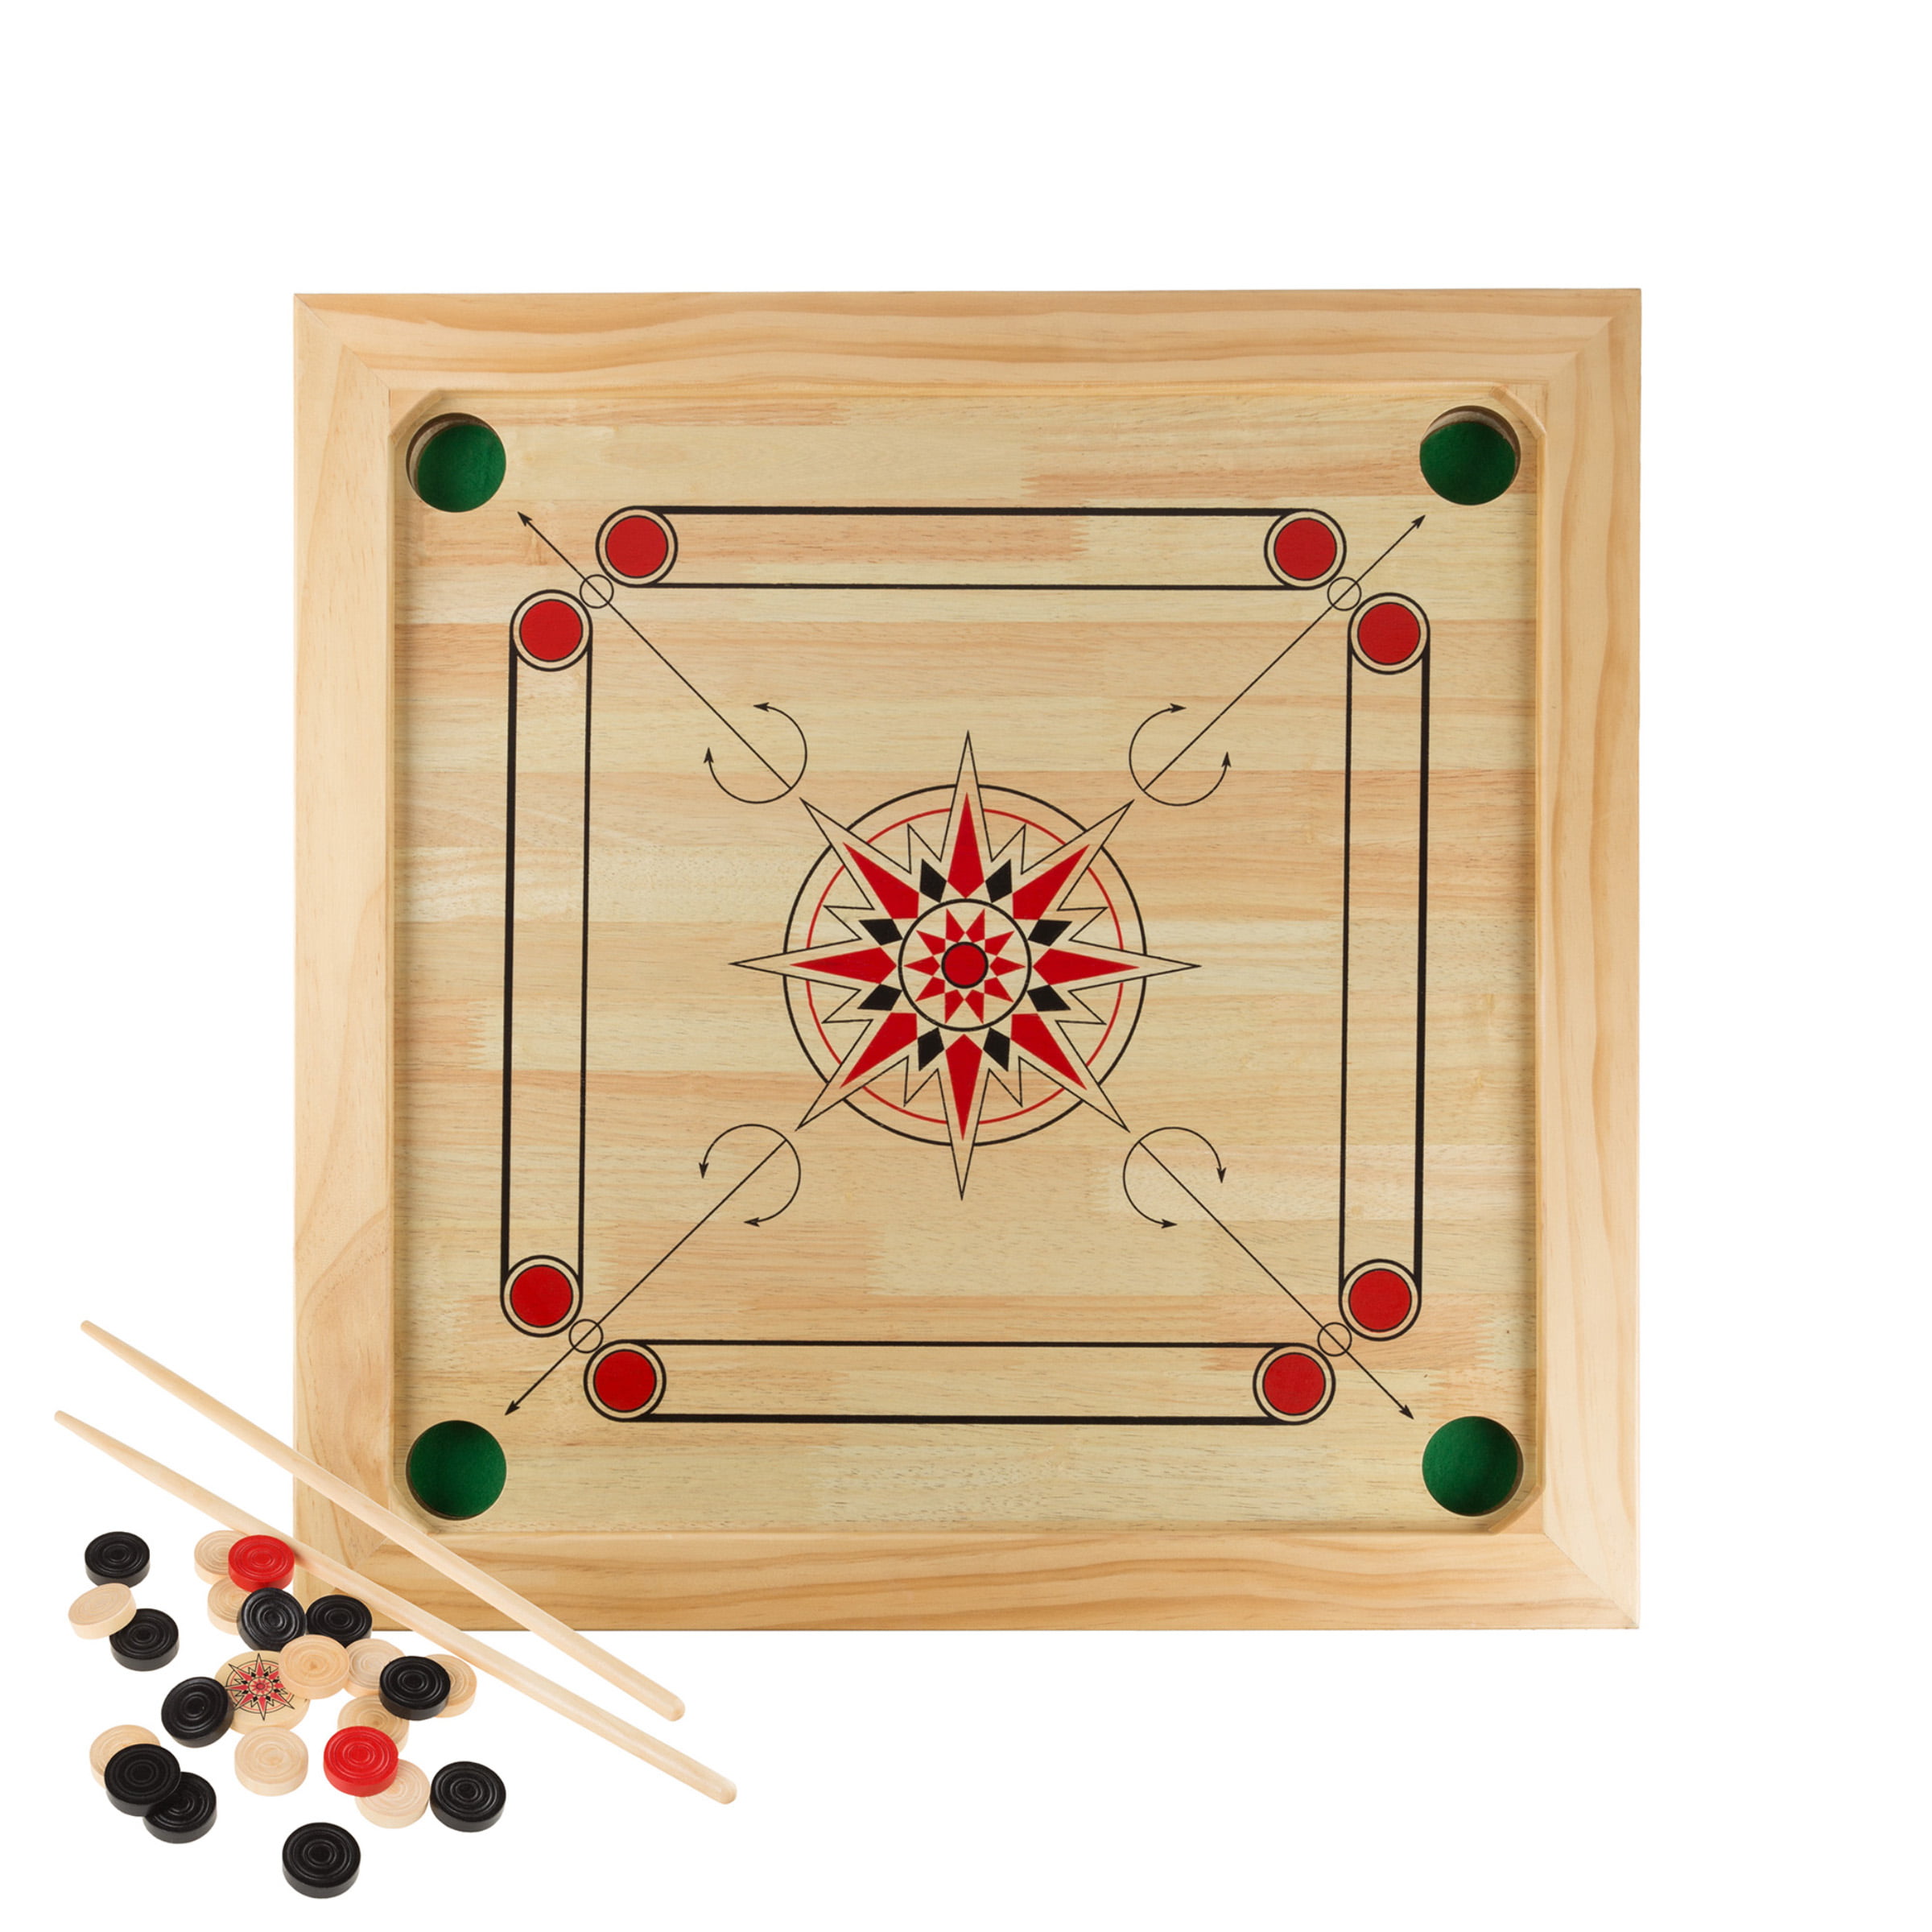 Brand New Carrom Board Comes With Striker and Coins Full Size 